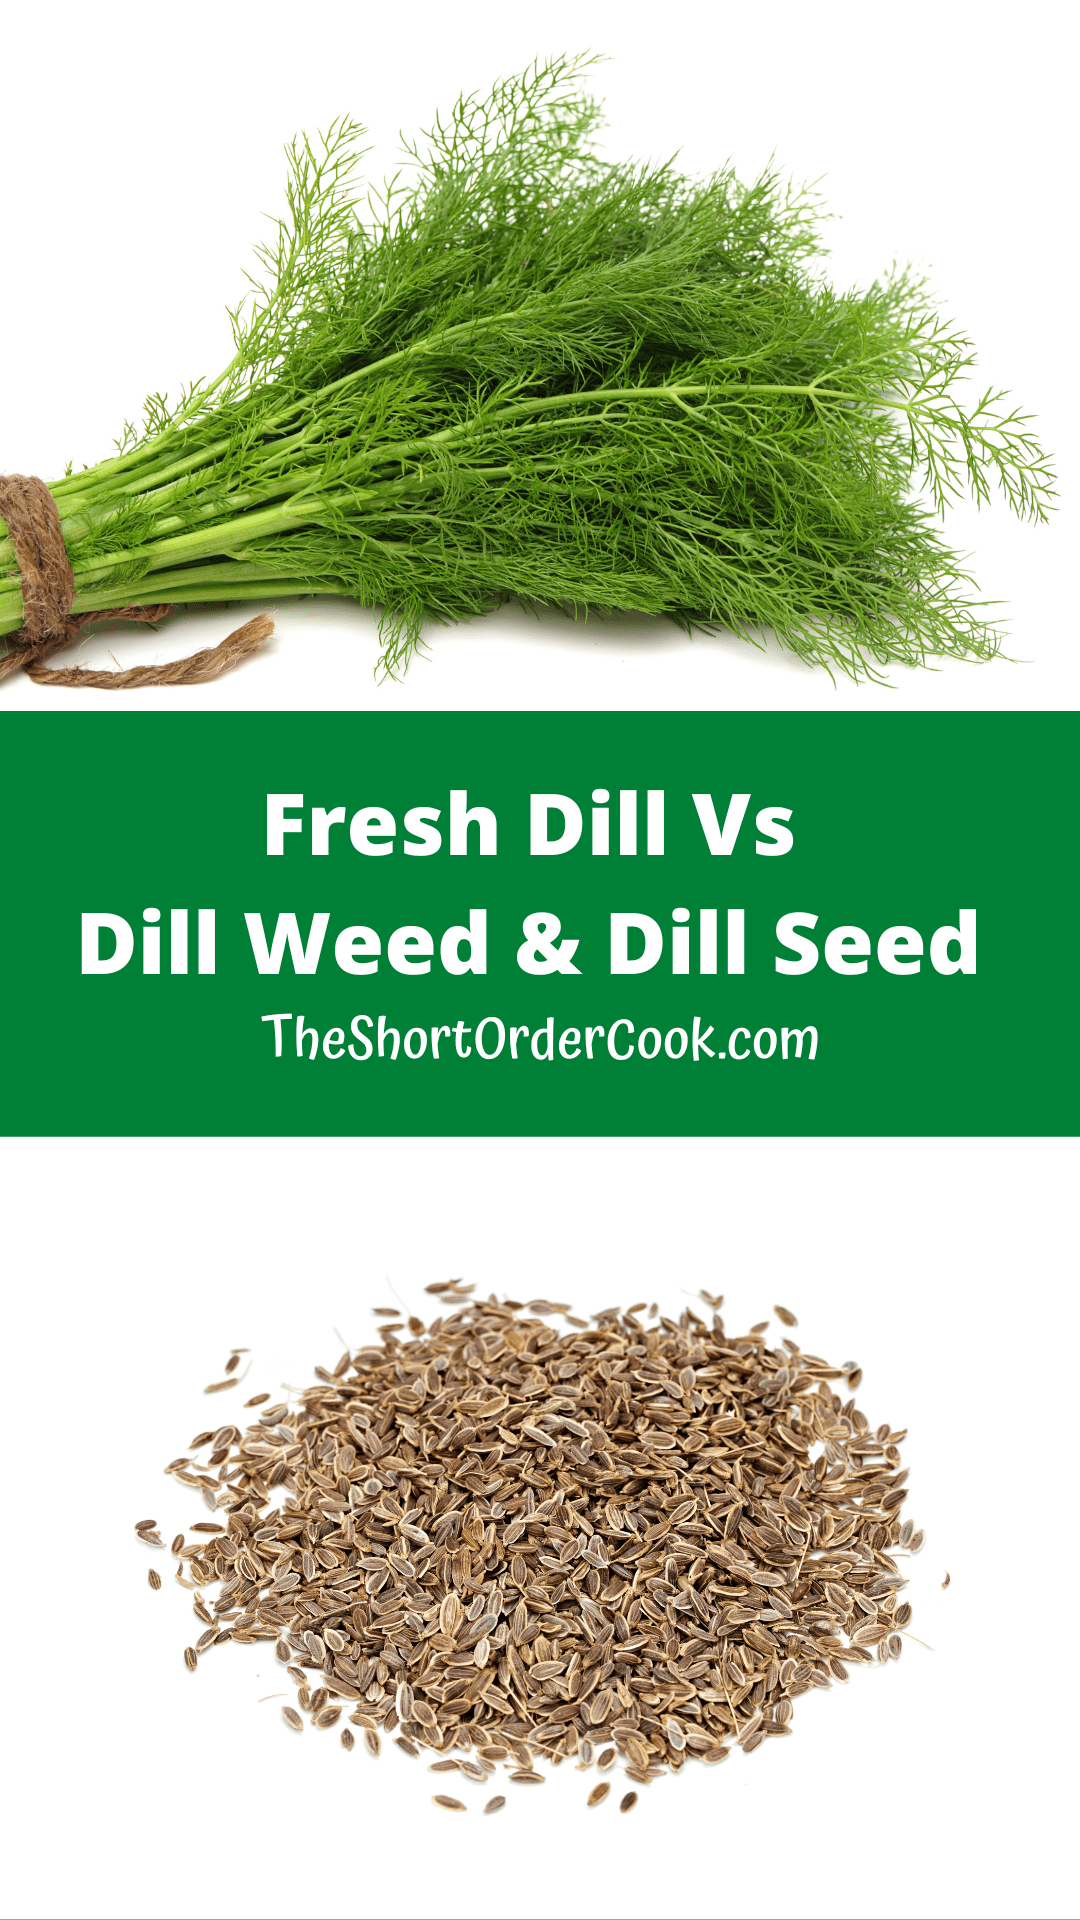 A bunch of fresh dill and a pile of dill seeds on a table.